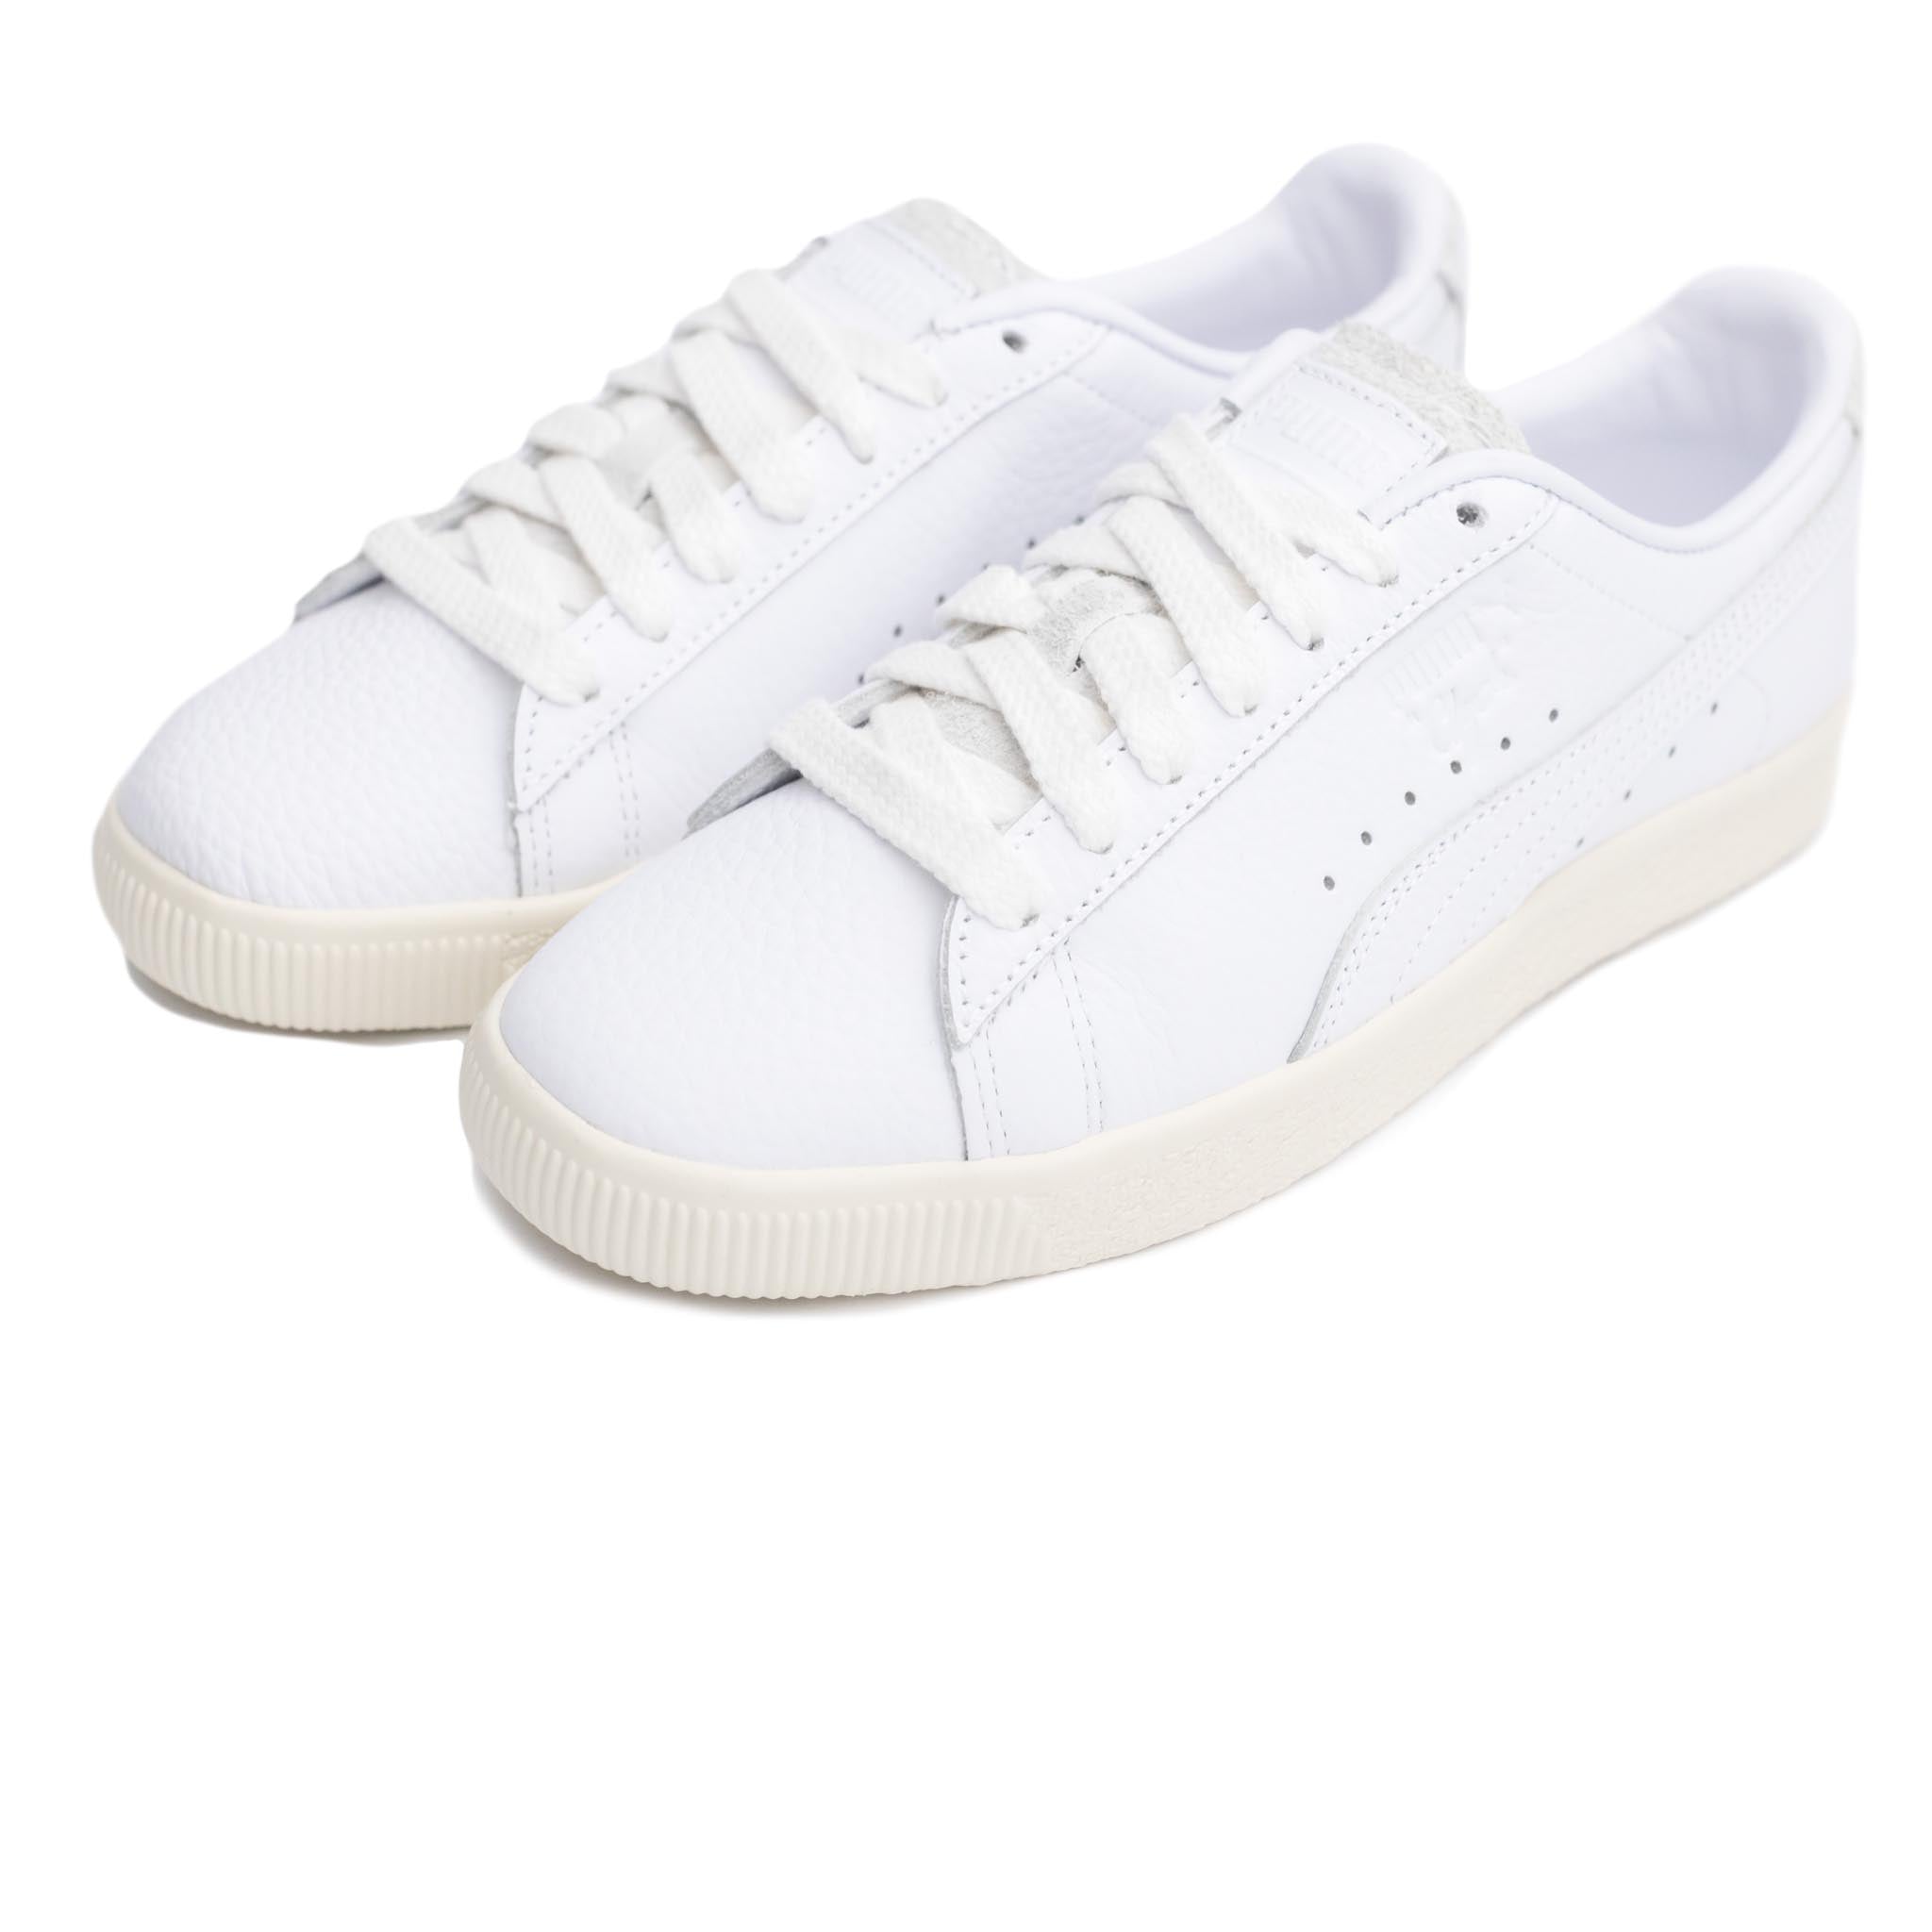 Puma Clyde Premium White/Frosted Ivory